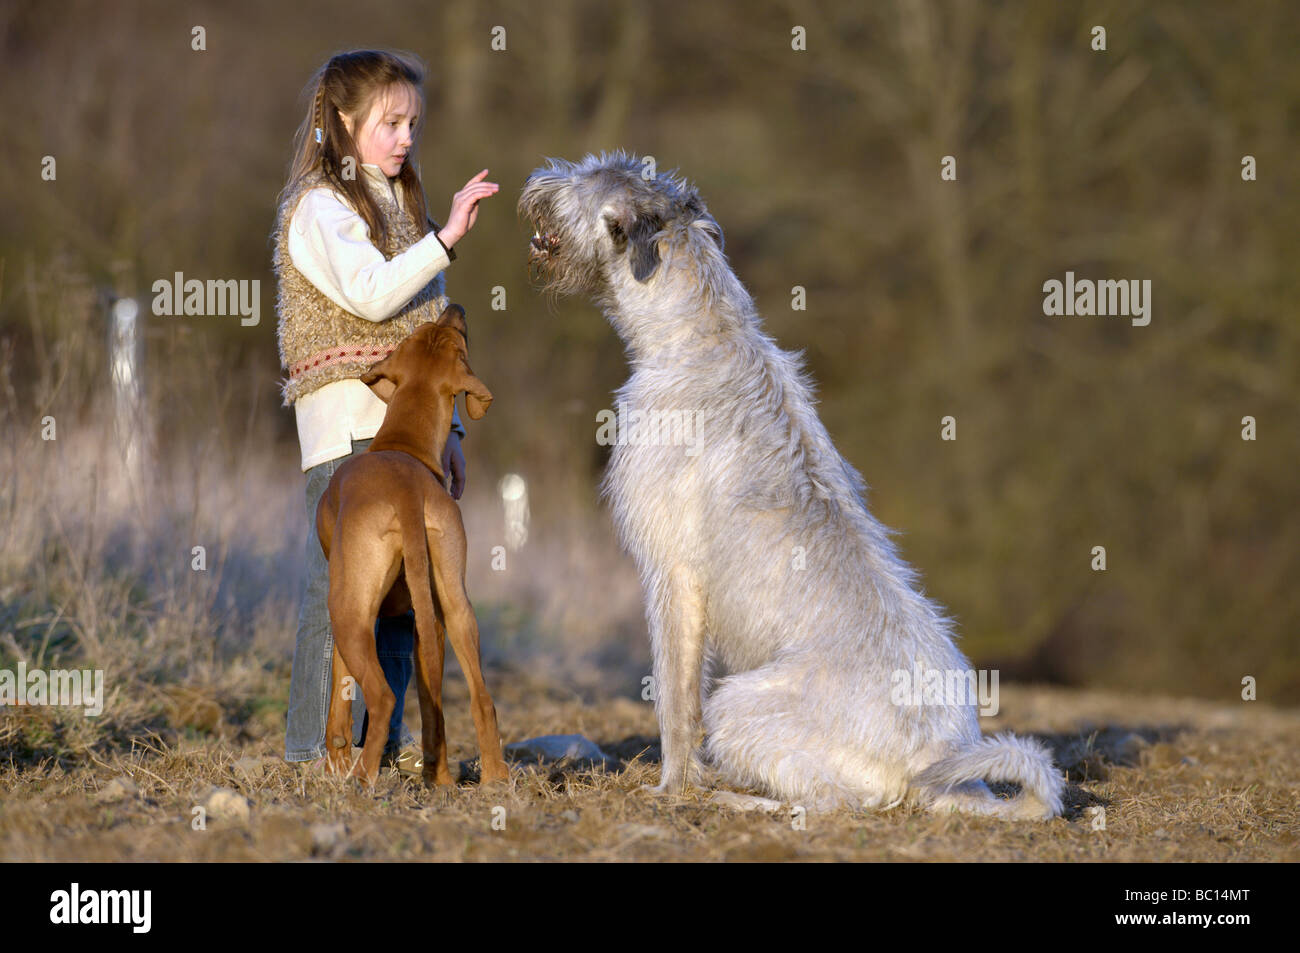 Irish Wolfhound (Canis lupus familiaris), the tallest dog breed. Girl with Wolfhound and a Rhodesian Ridgeback Stock Photo